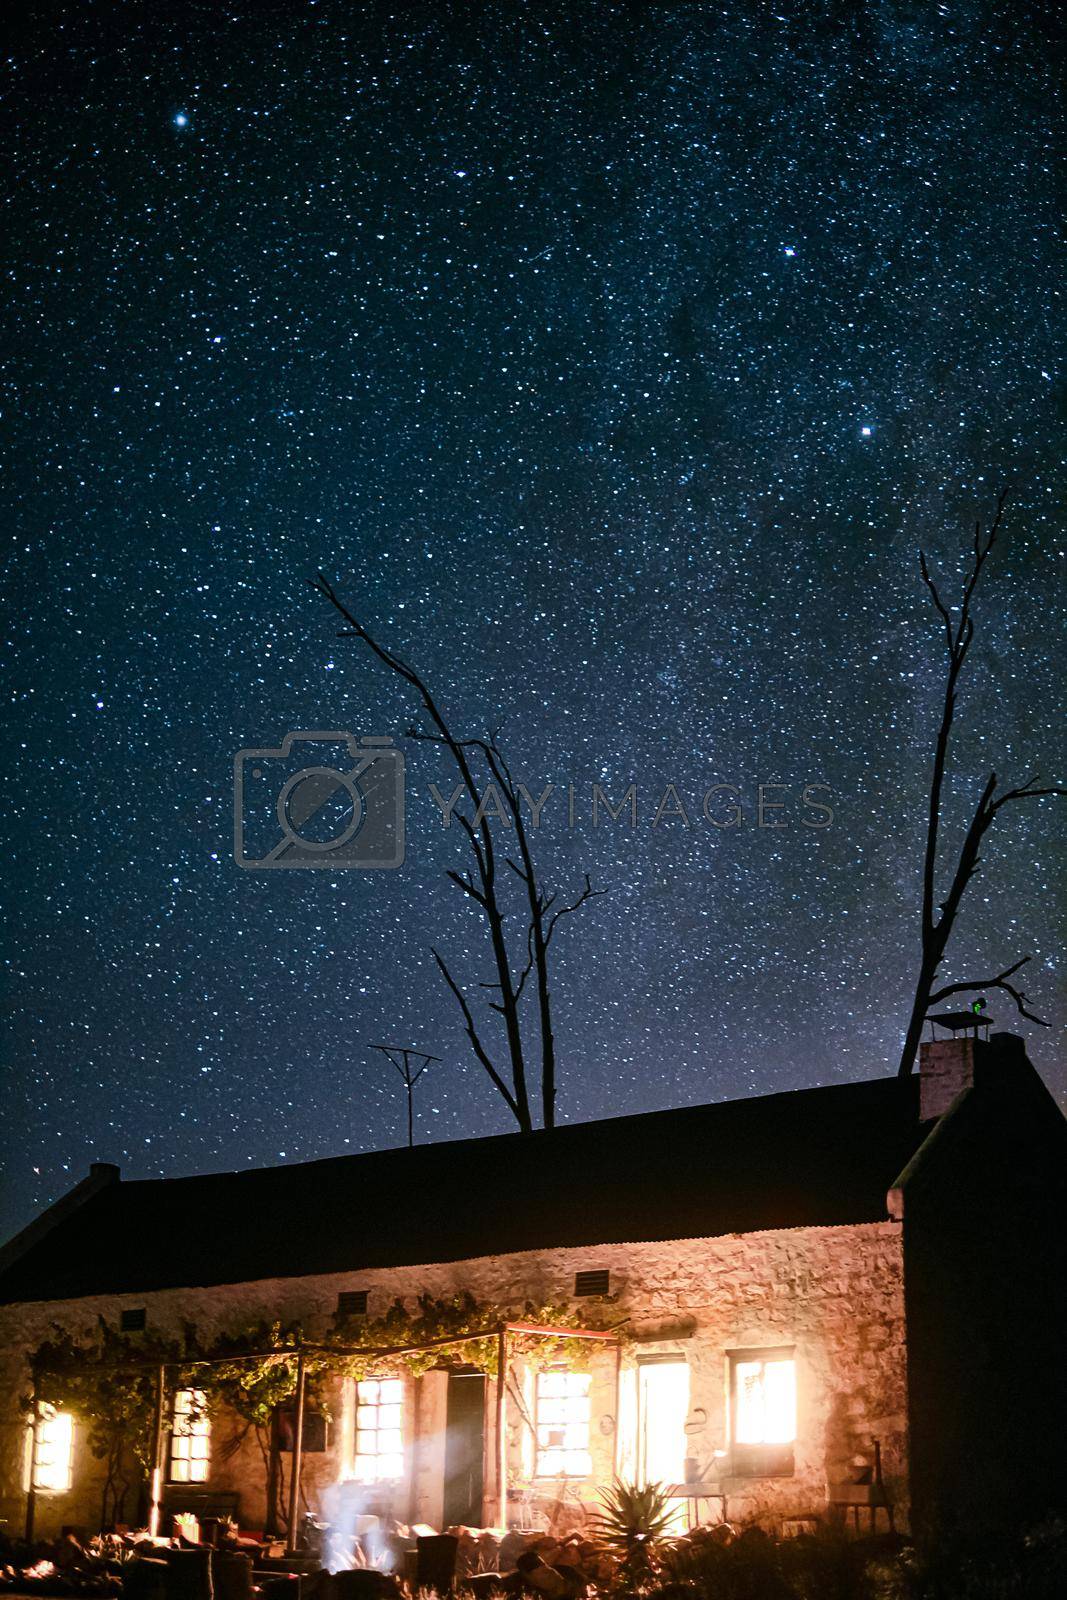 Shot of a house in the countryside on a dark starry night.